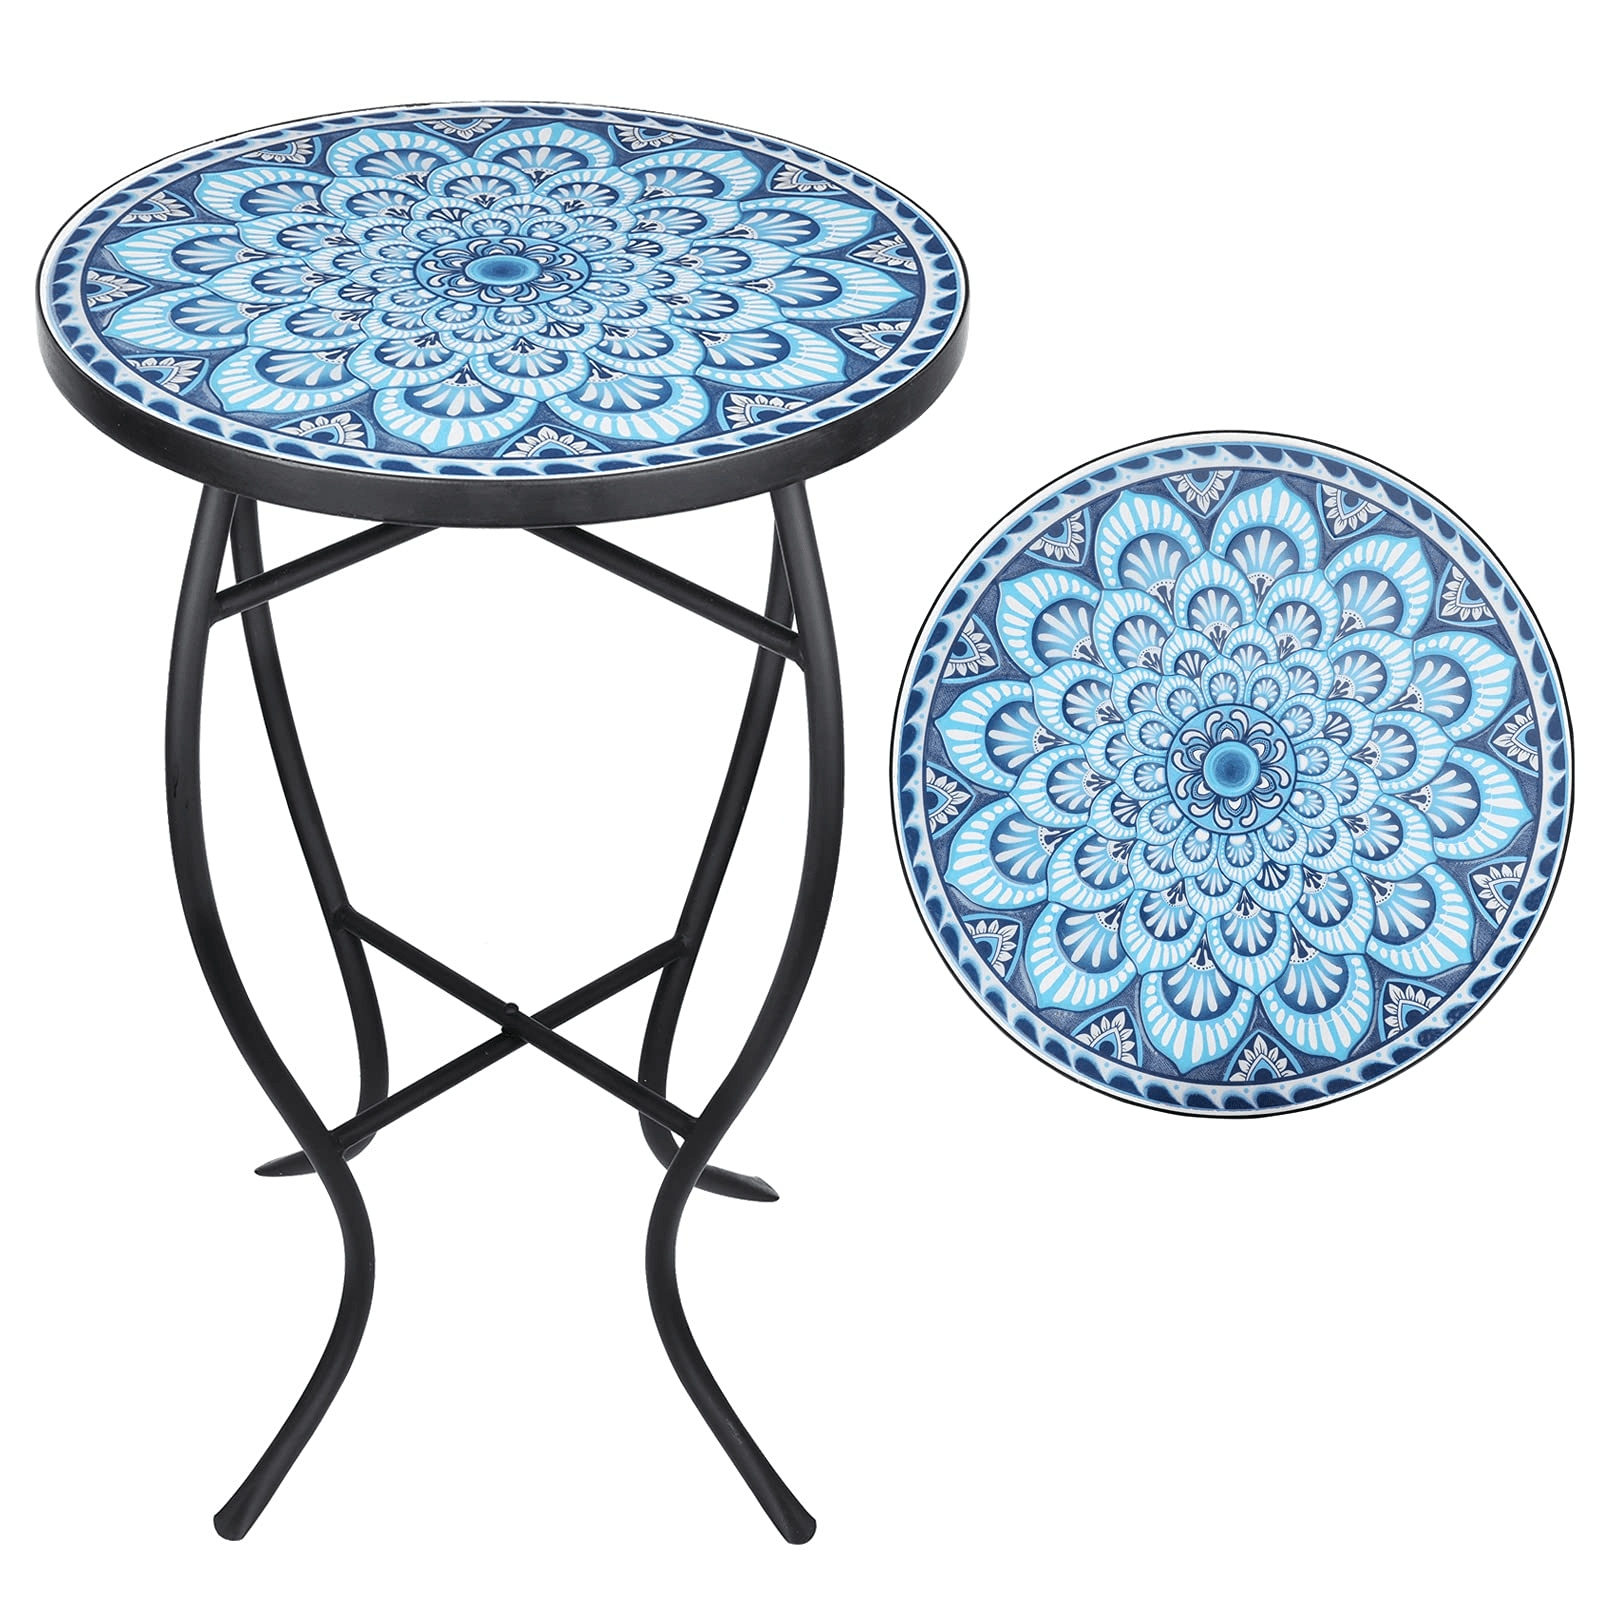 VCUTEKA Patio Side Table Plant Stands Outdoor Accent Table Small Mosaic Table Glass Top Round Balcony Coffee Table 